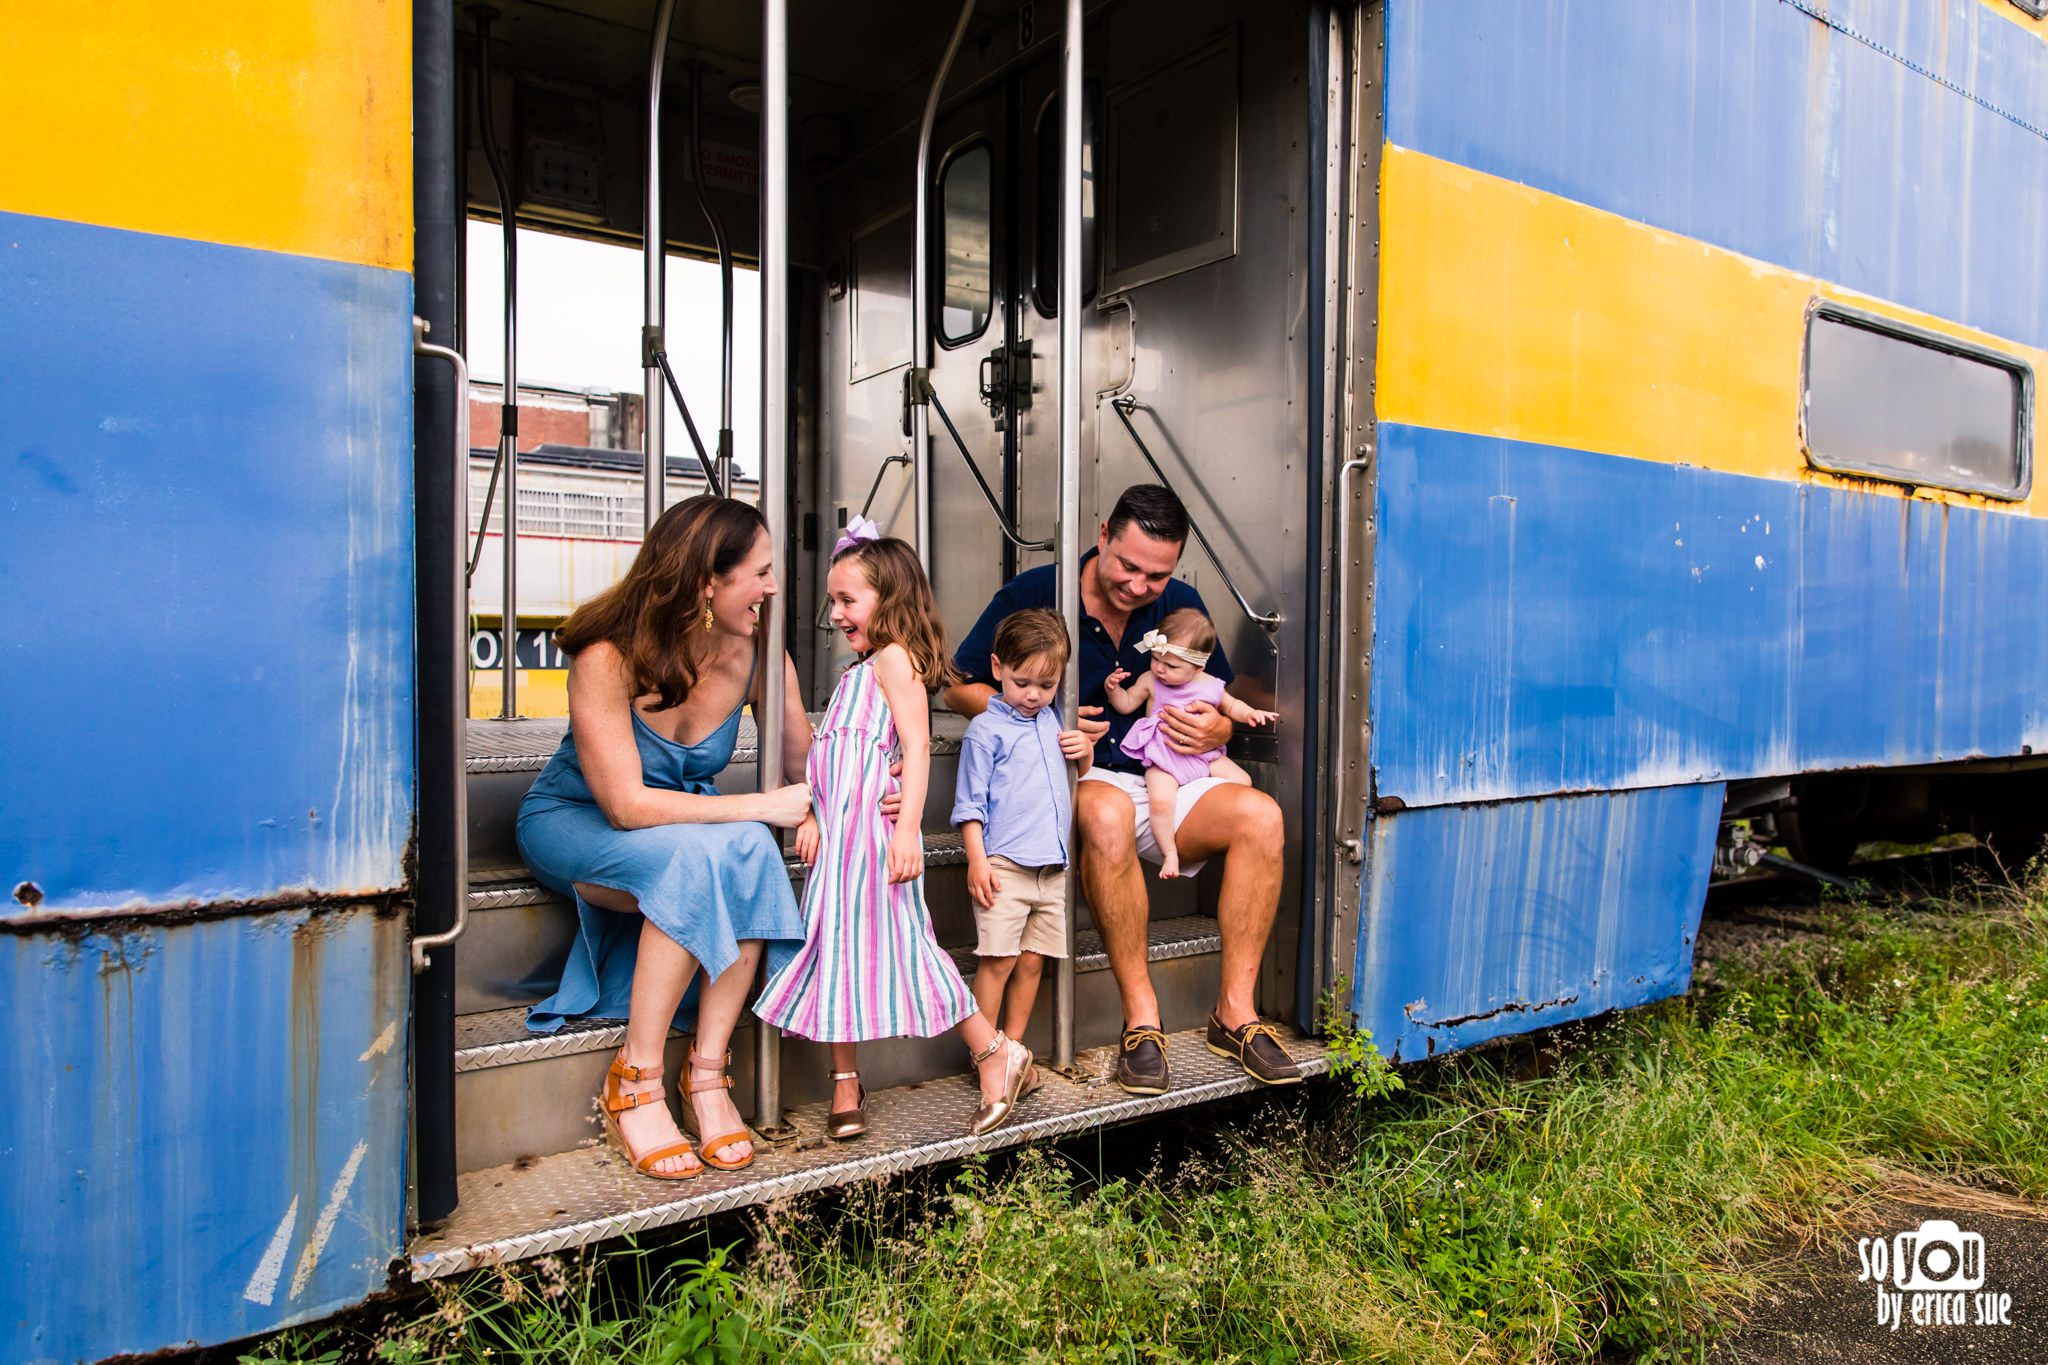 so-you-by-erica-sue-gold-coast-railroad-museum-miami-family-photo-shoot-session-7391.JPG